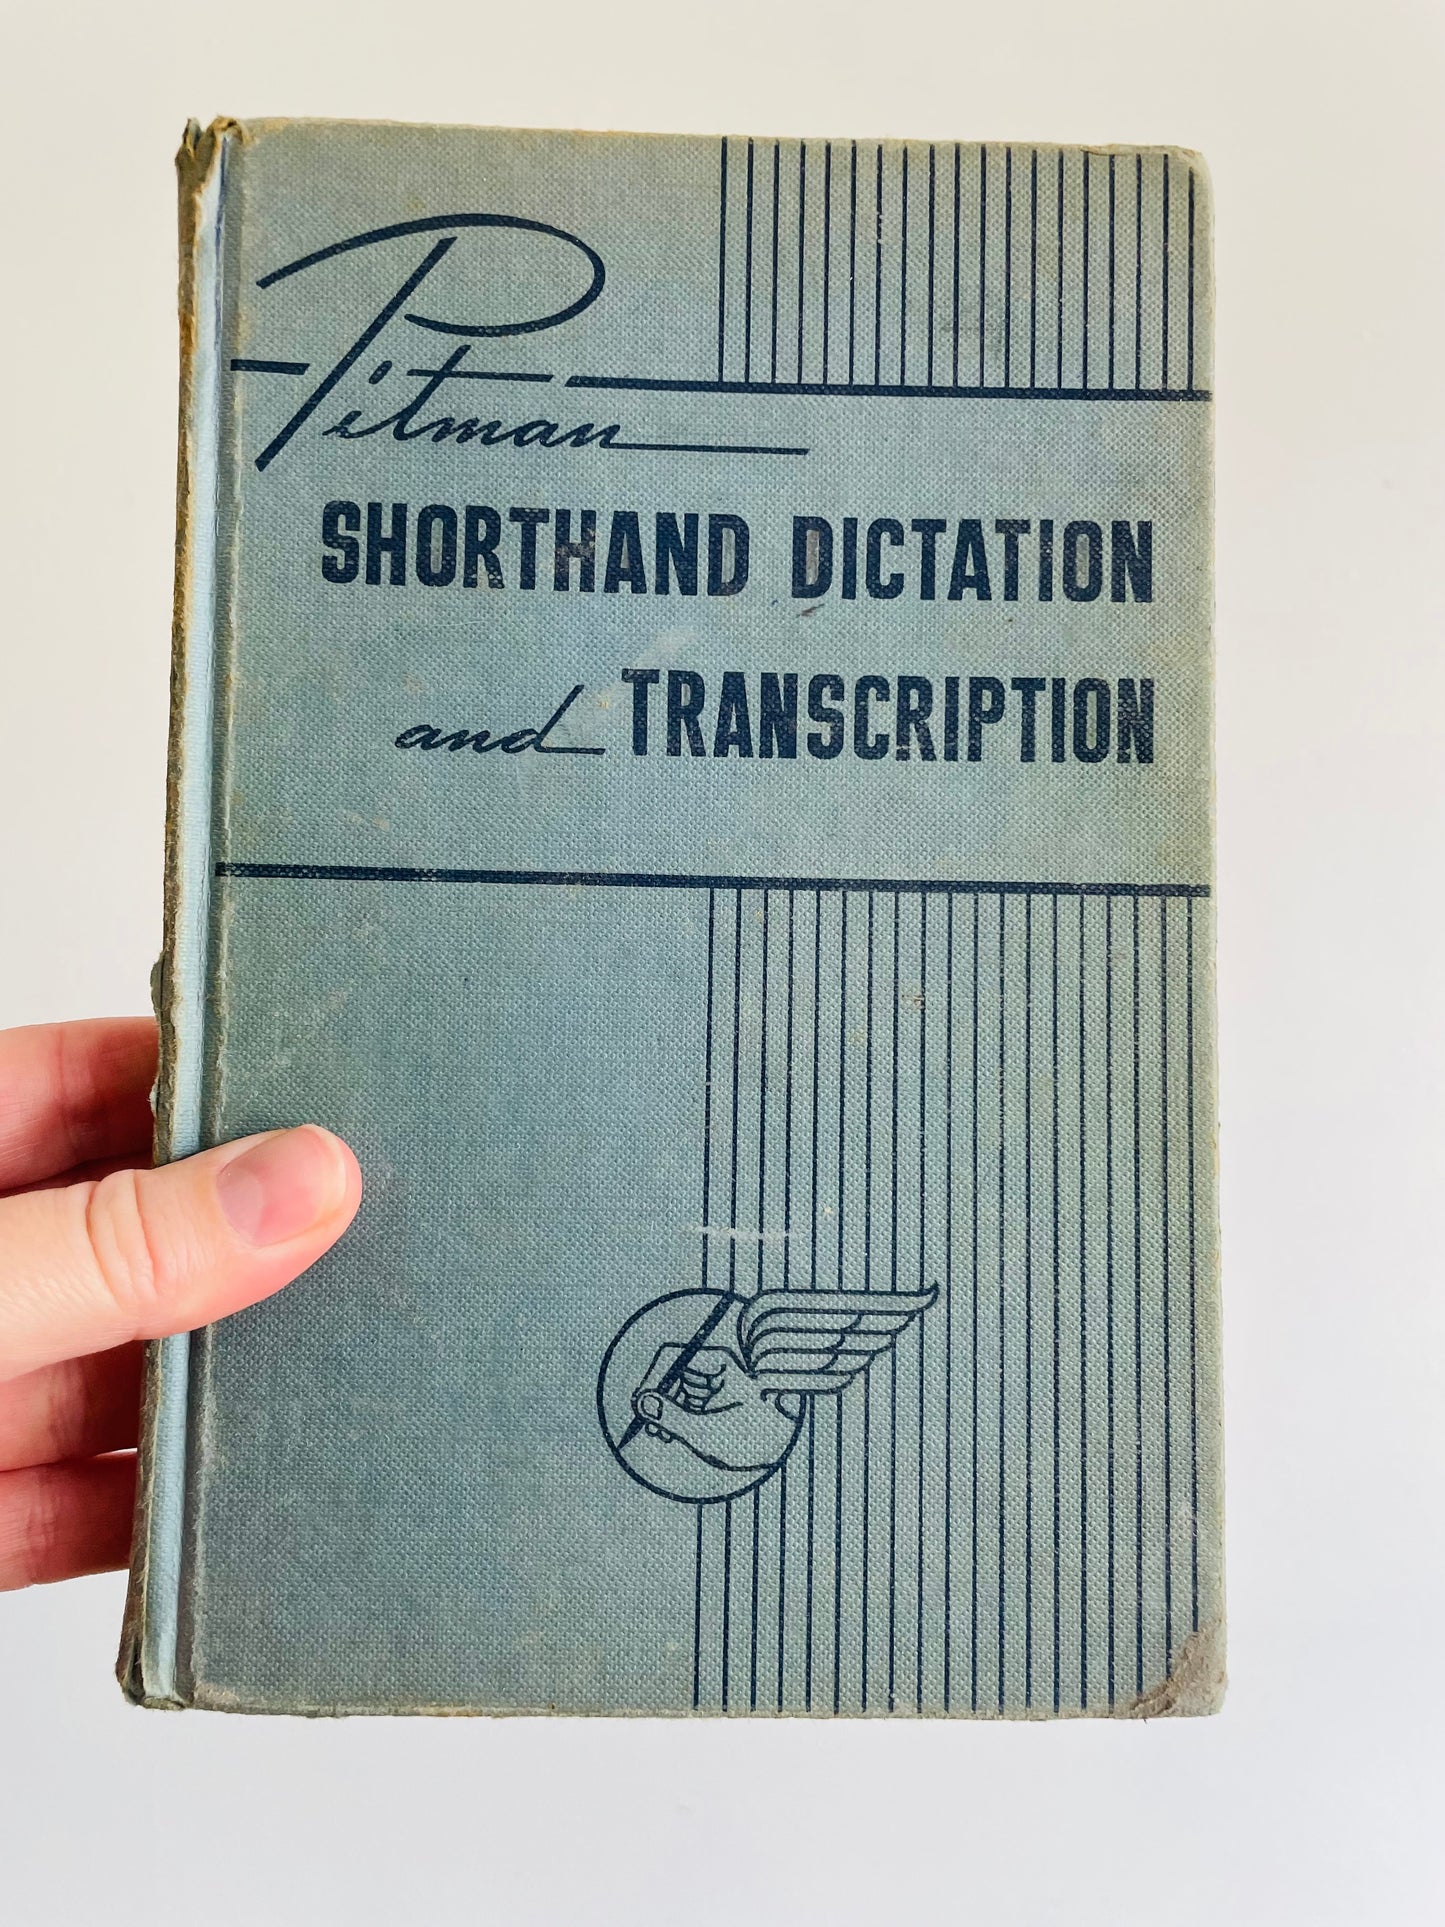 Shorthand Clothbound Hardcover Book Bundle - Set of 3 - Pitman Shorthand Dictation & Transcription, New Basic Course in Pitman Shorthand (1962), & Steps to Success in Shorthand Book II (1948)